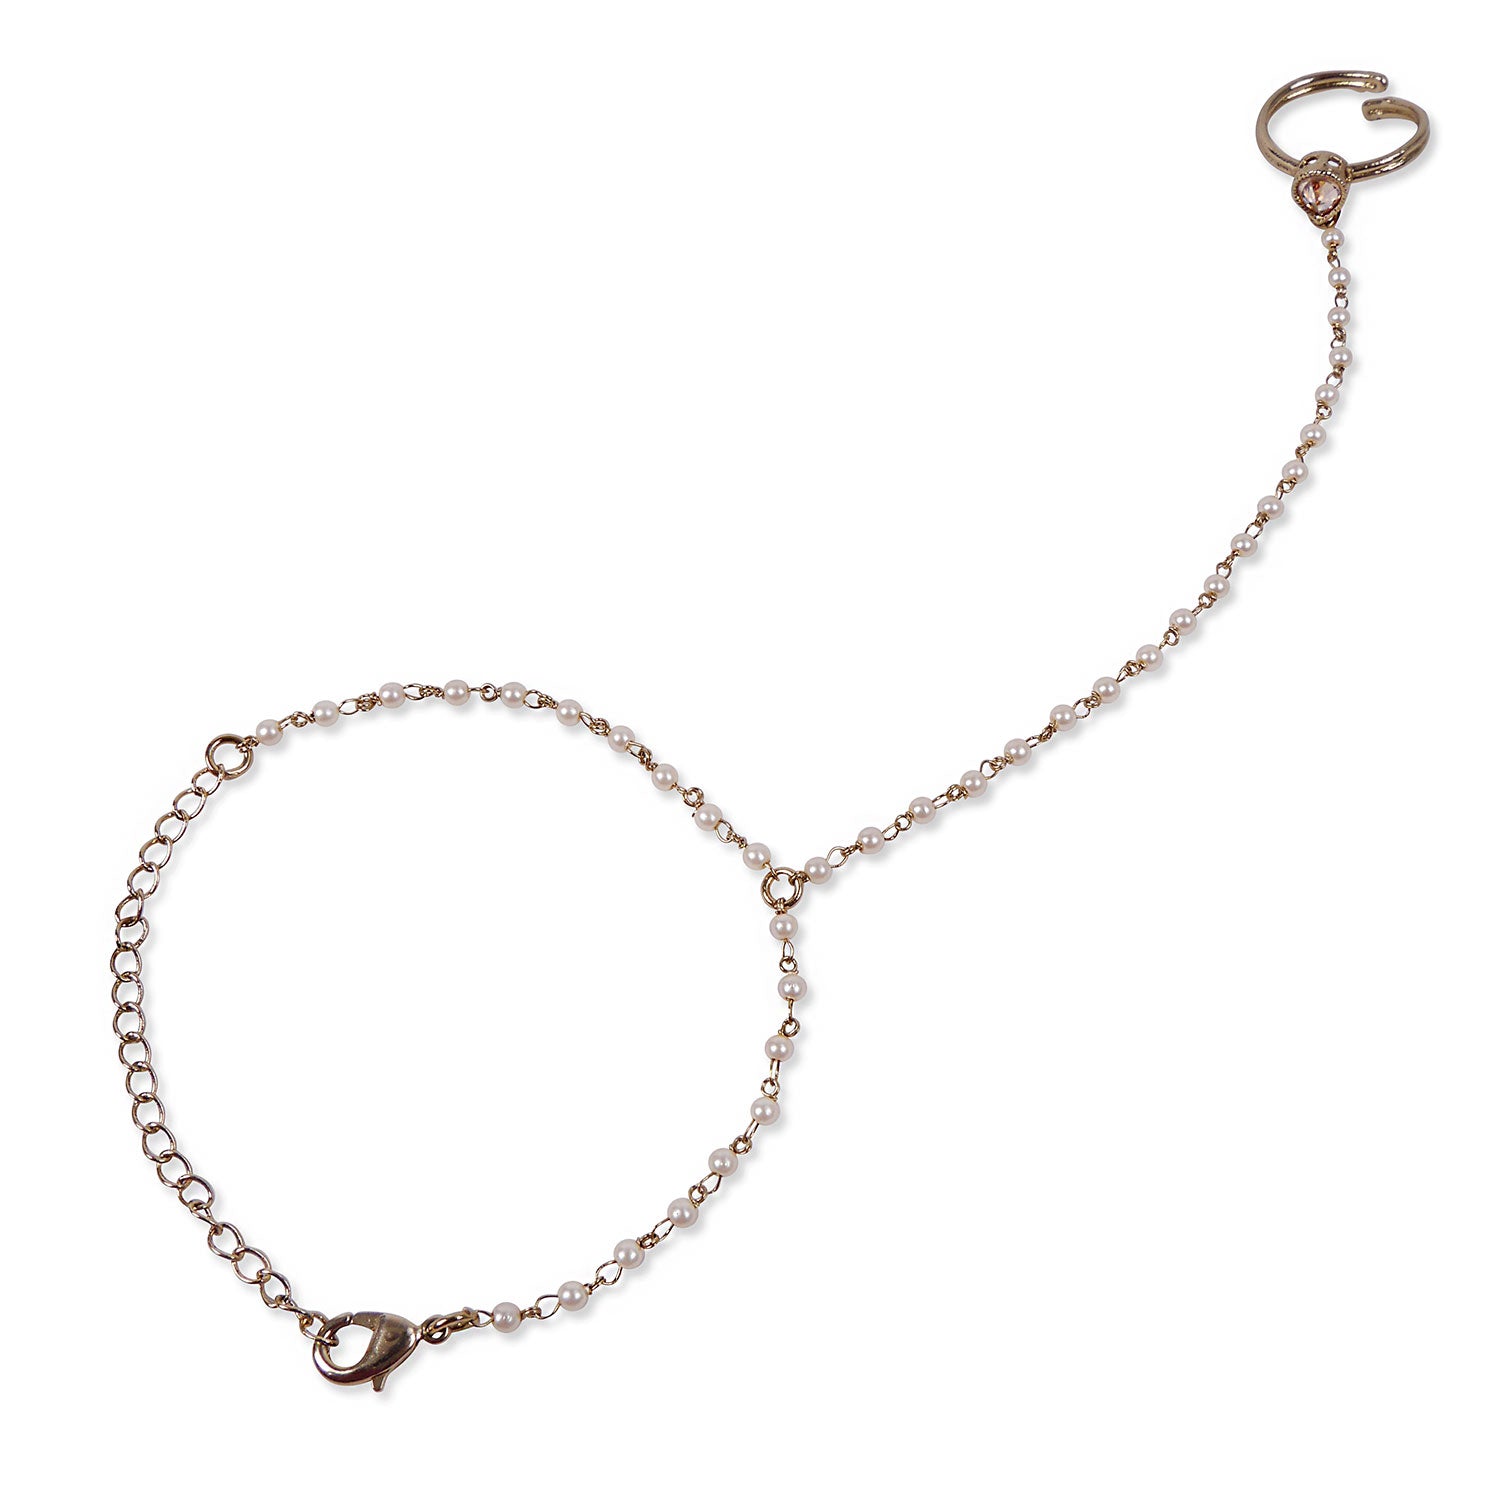 Pearl Hand Chain in Antique Gold